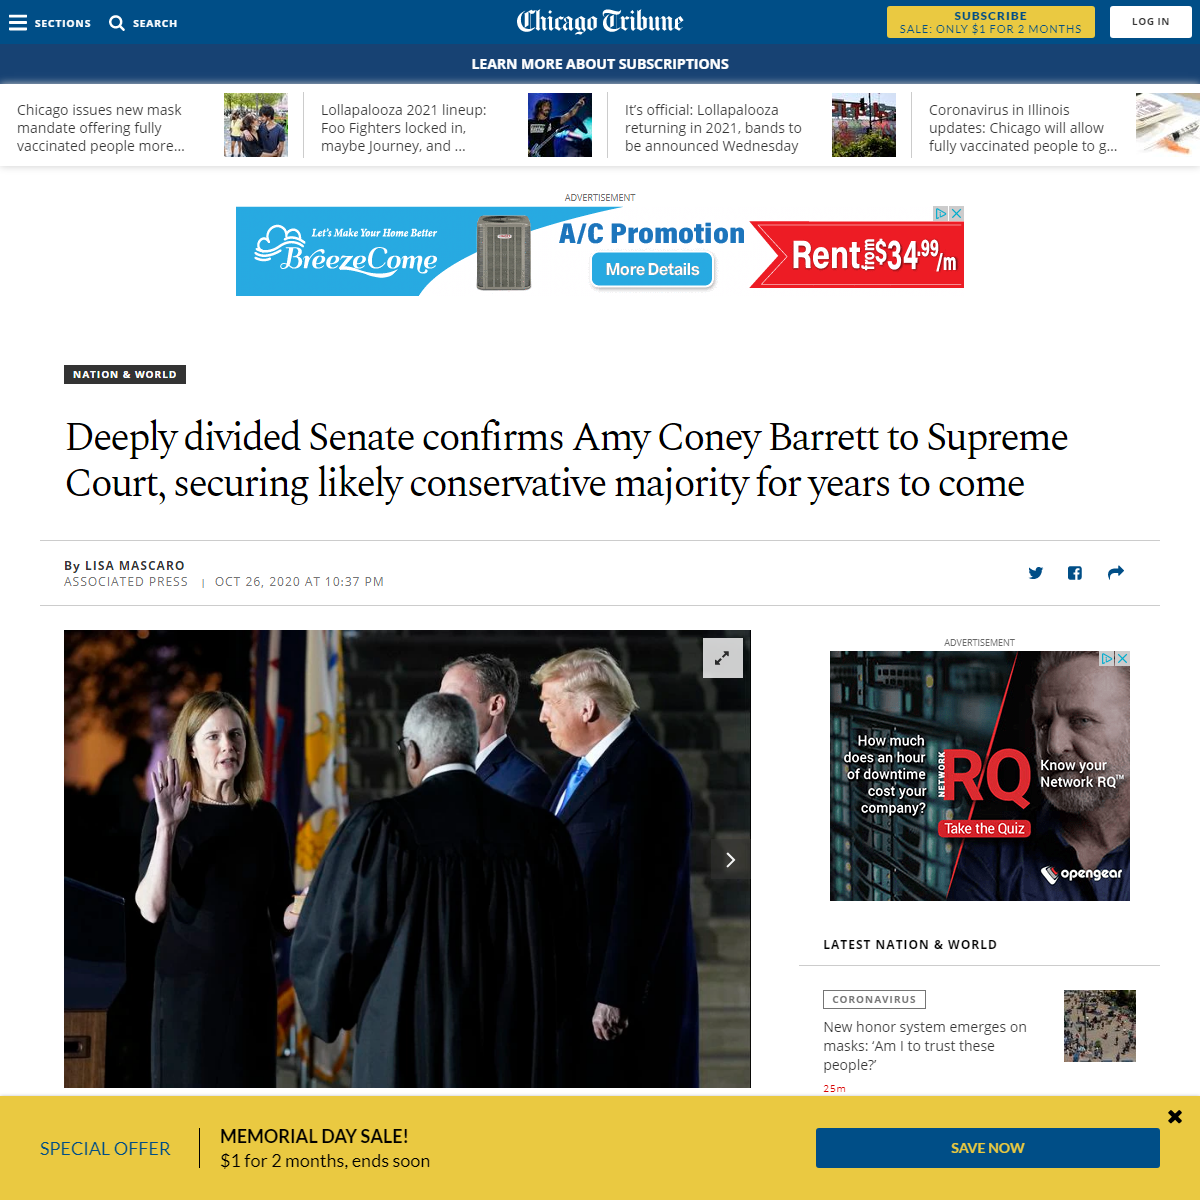 A complete backup of https://www.chicagotribune.com/nation-world/ct-nw-amy-coney-barrett-supreme-court-confirmation-20201026-kbq